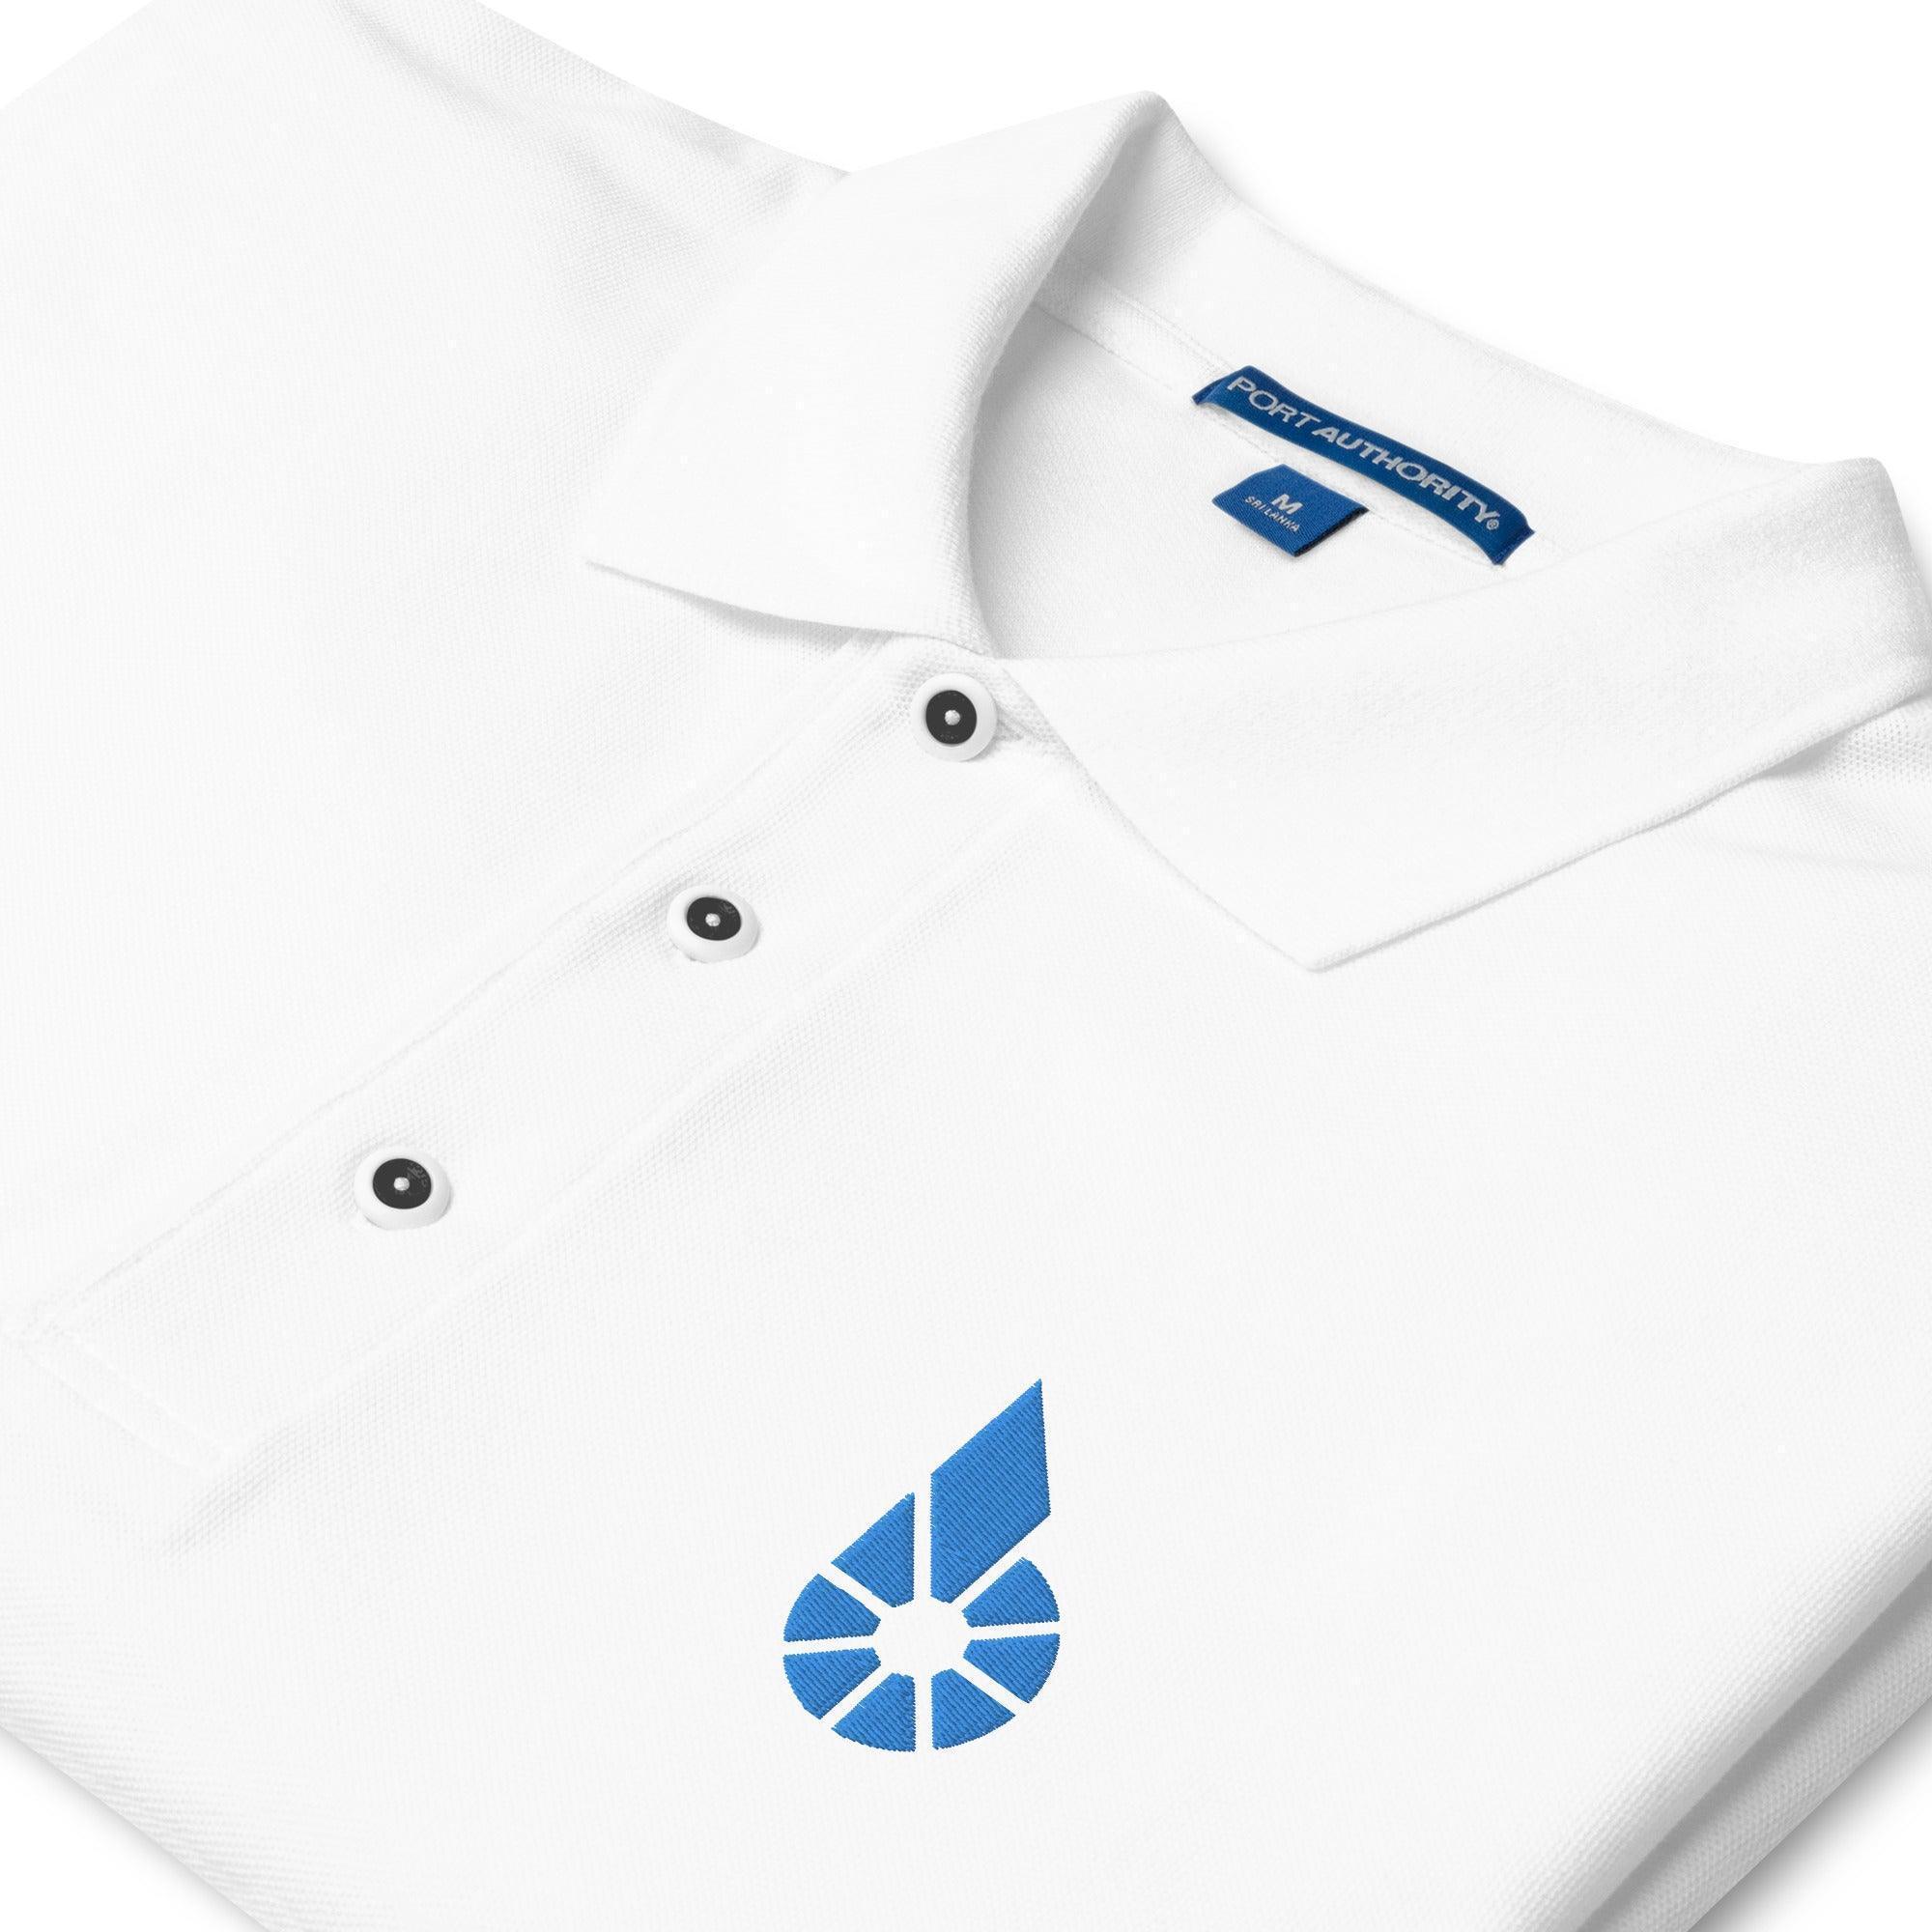 Bitshares Polo Shirt - InvestmenTees